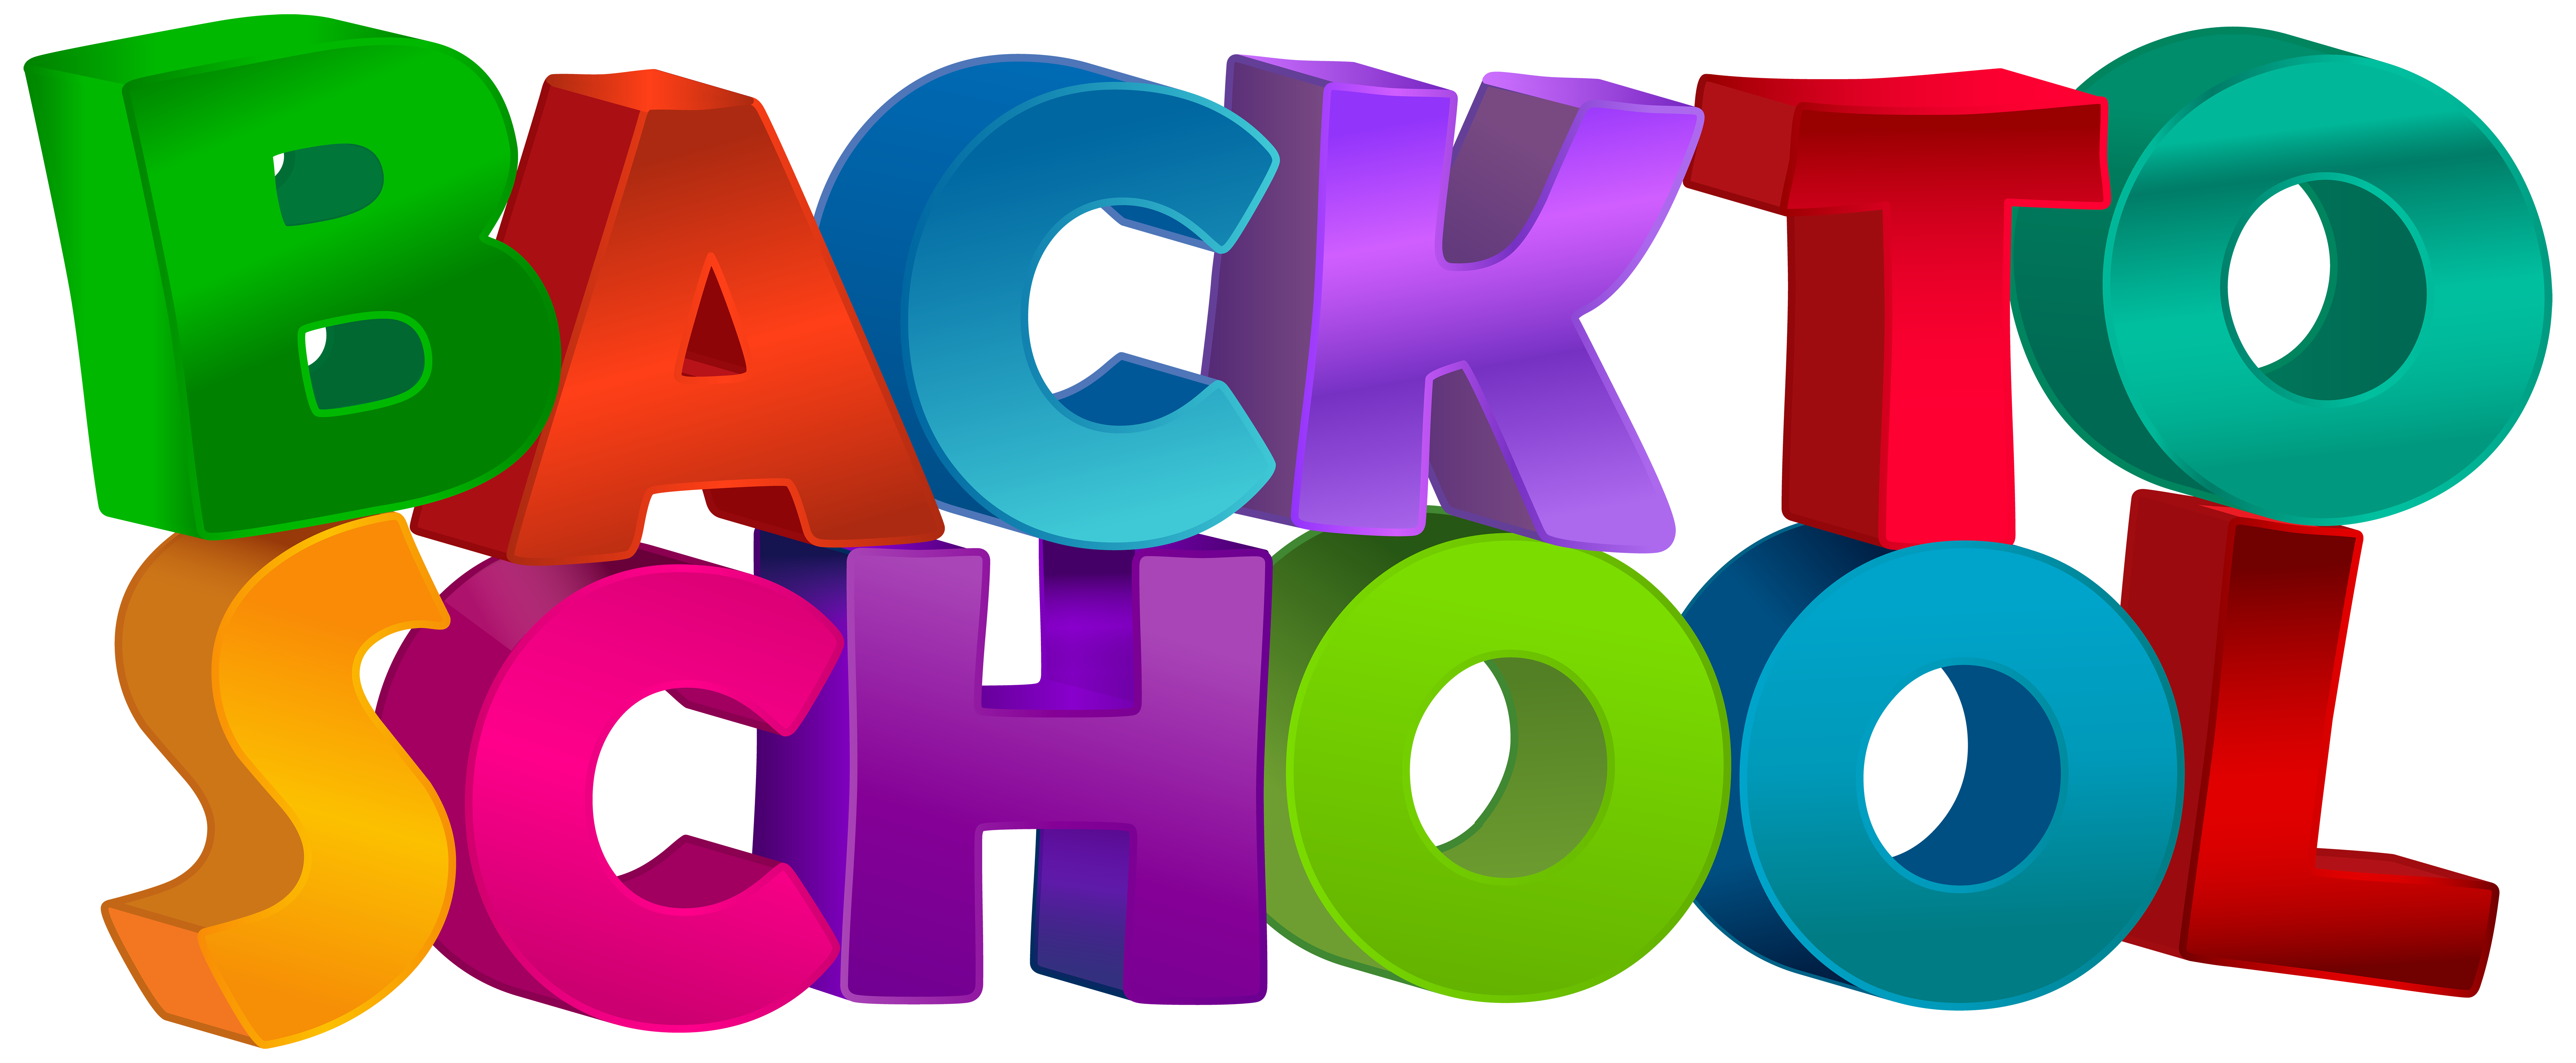 Back to School Text Transparent Clip Art Image | Gallery ...